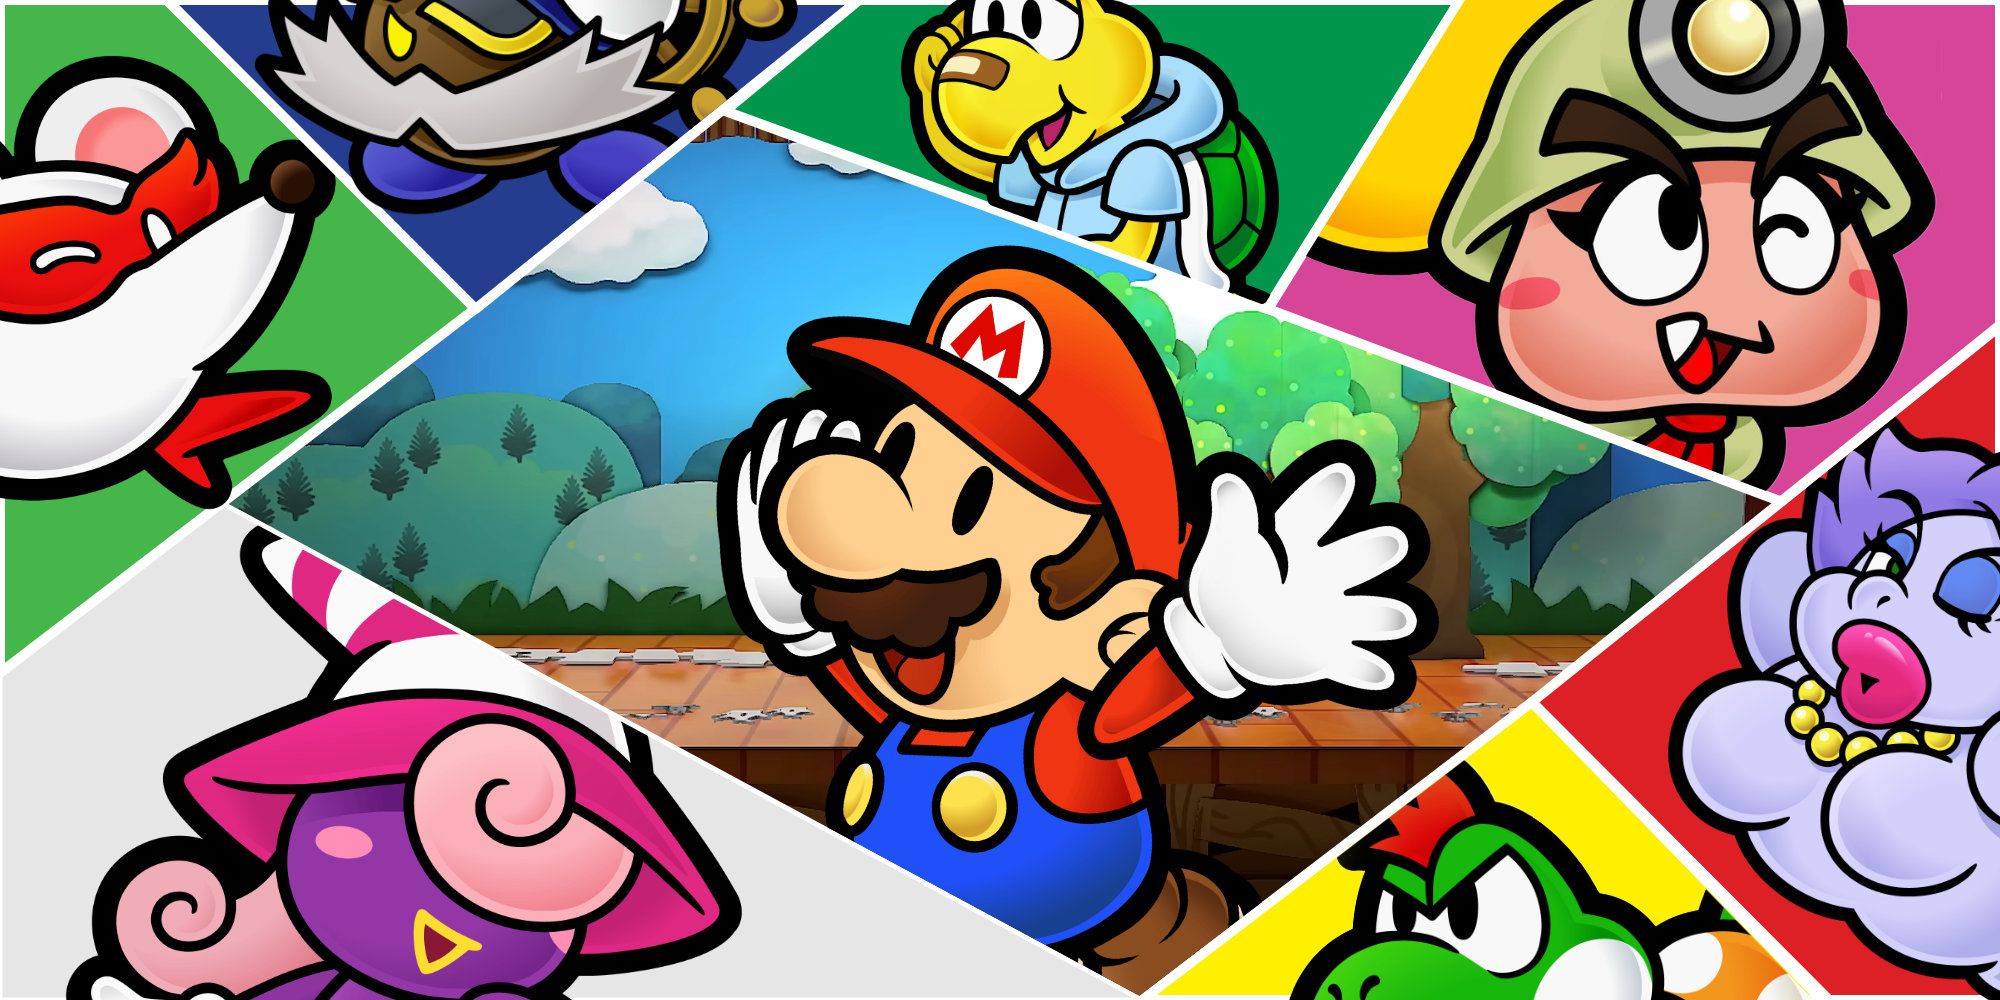 A collage of the characters from Paper Mario The Thousand Year Door